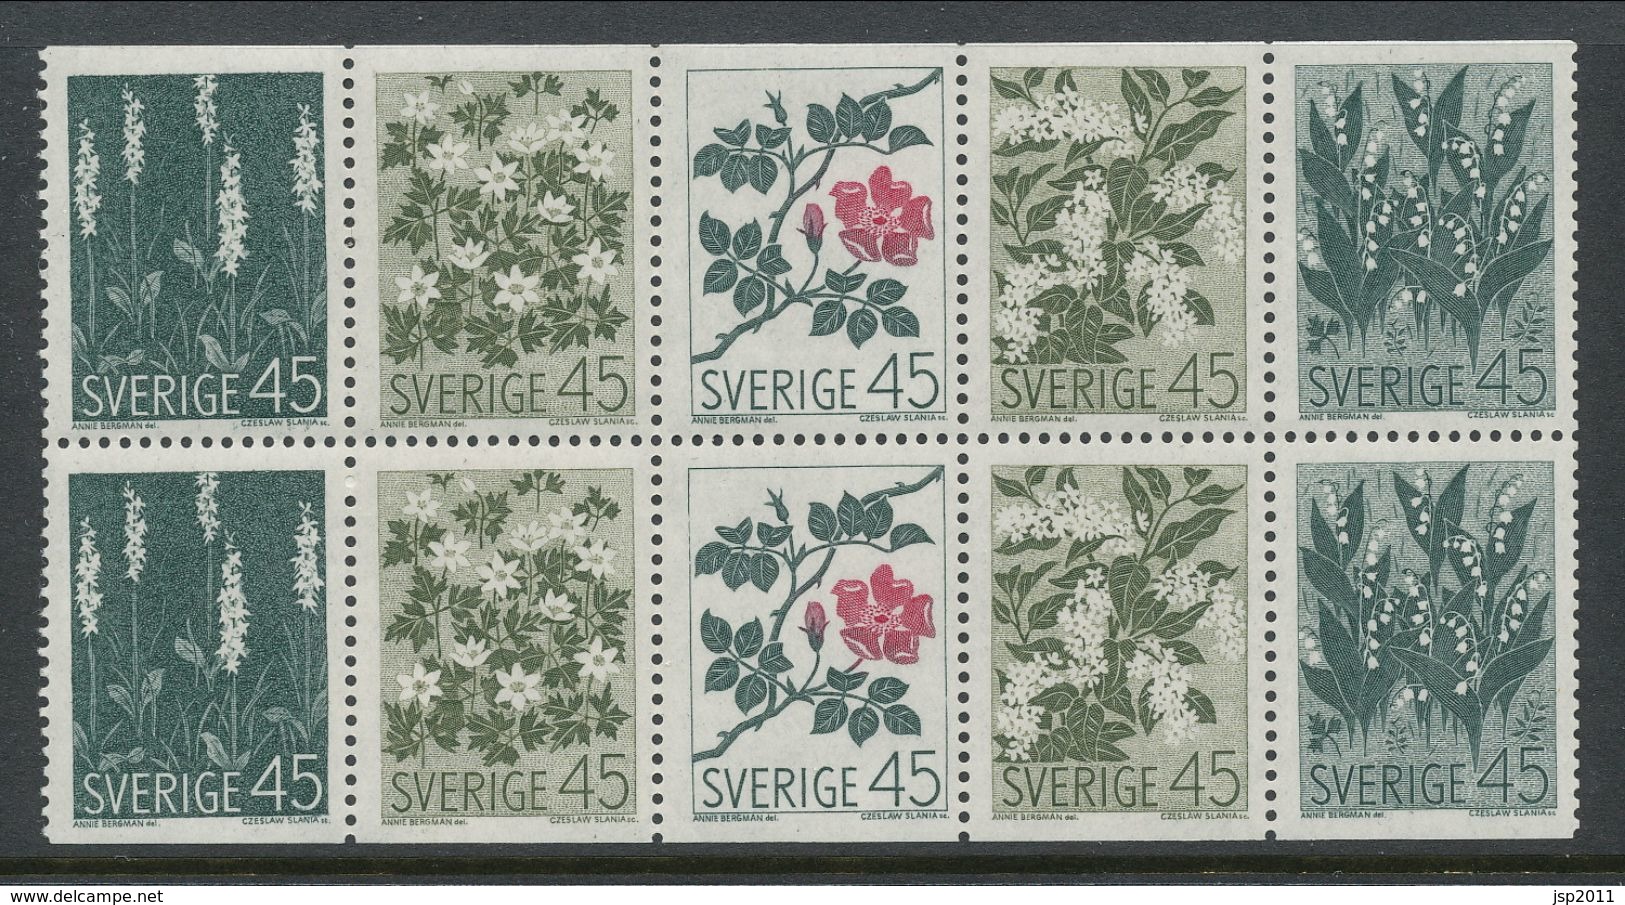 Sweden 1968 Facit # 626-630. Wild Flowers. Complete Pane Of 10 From Booklet H205. MNH (**) - Unused Stamps